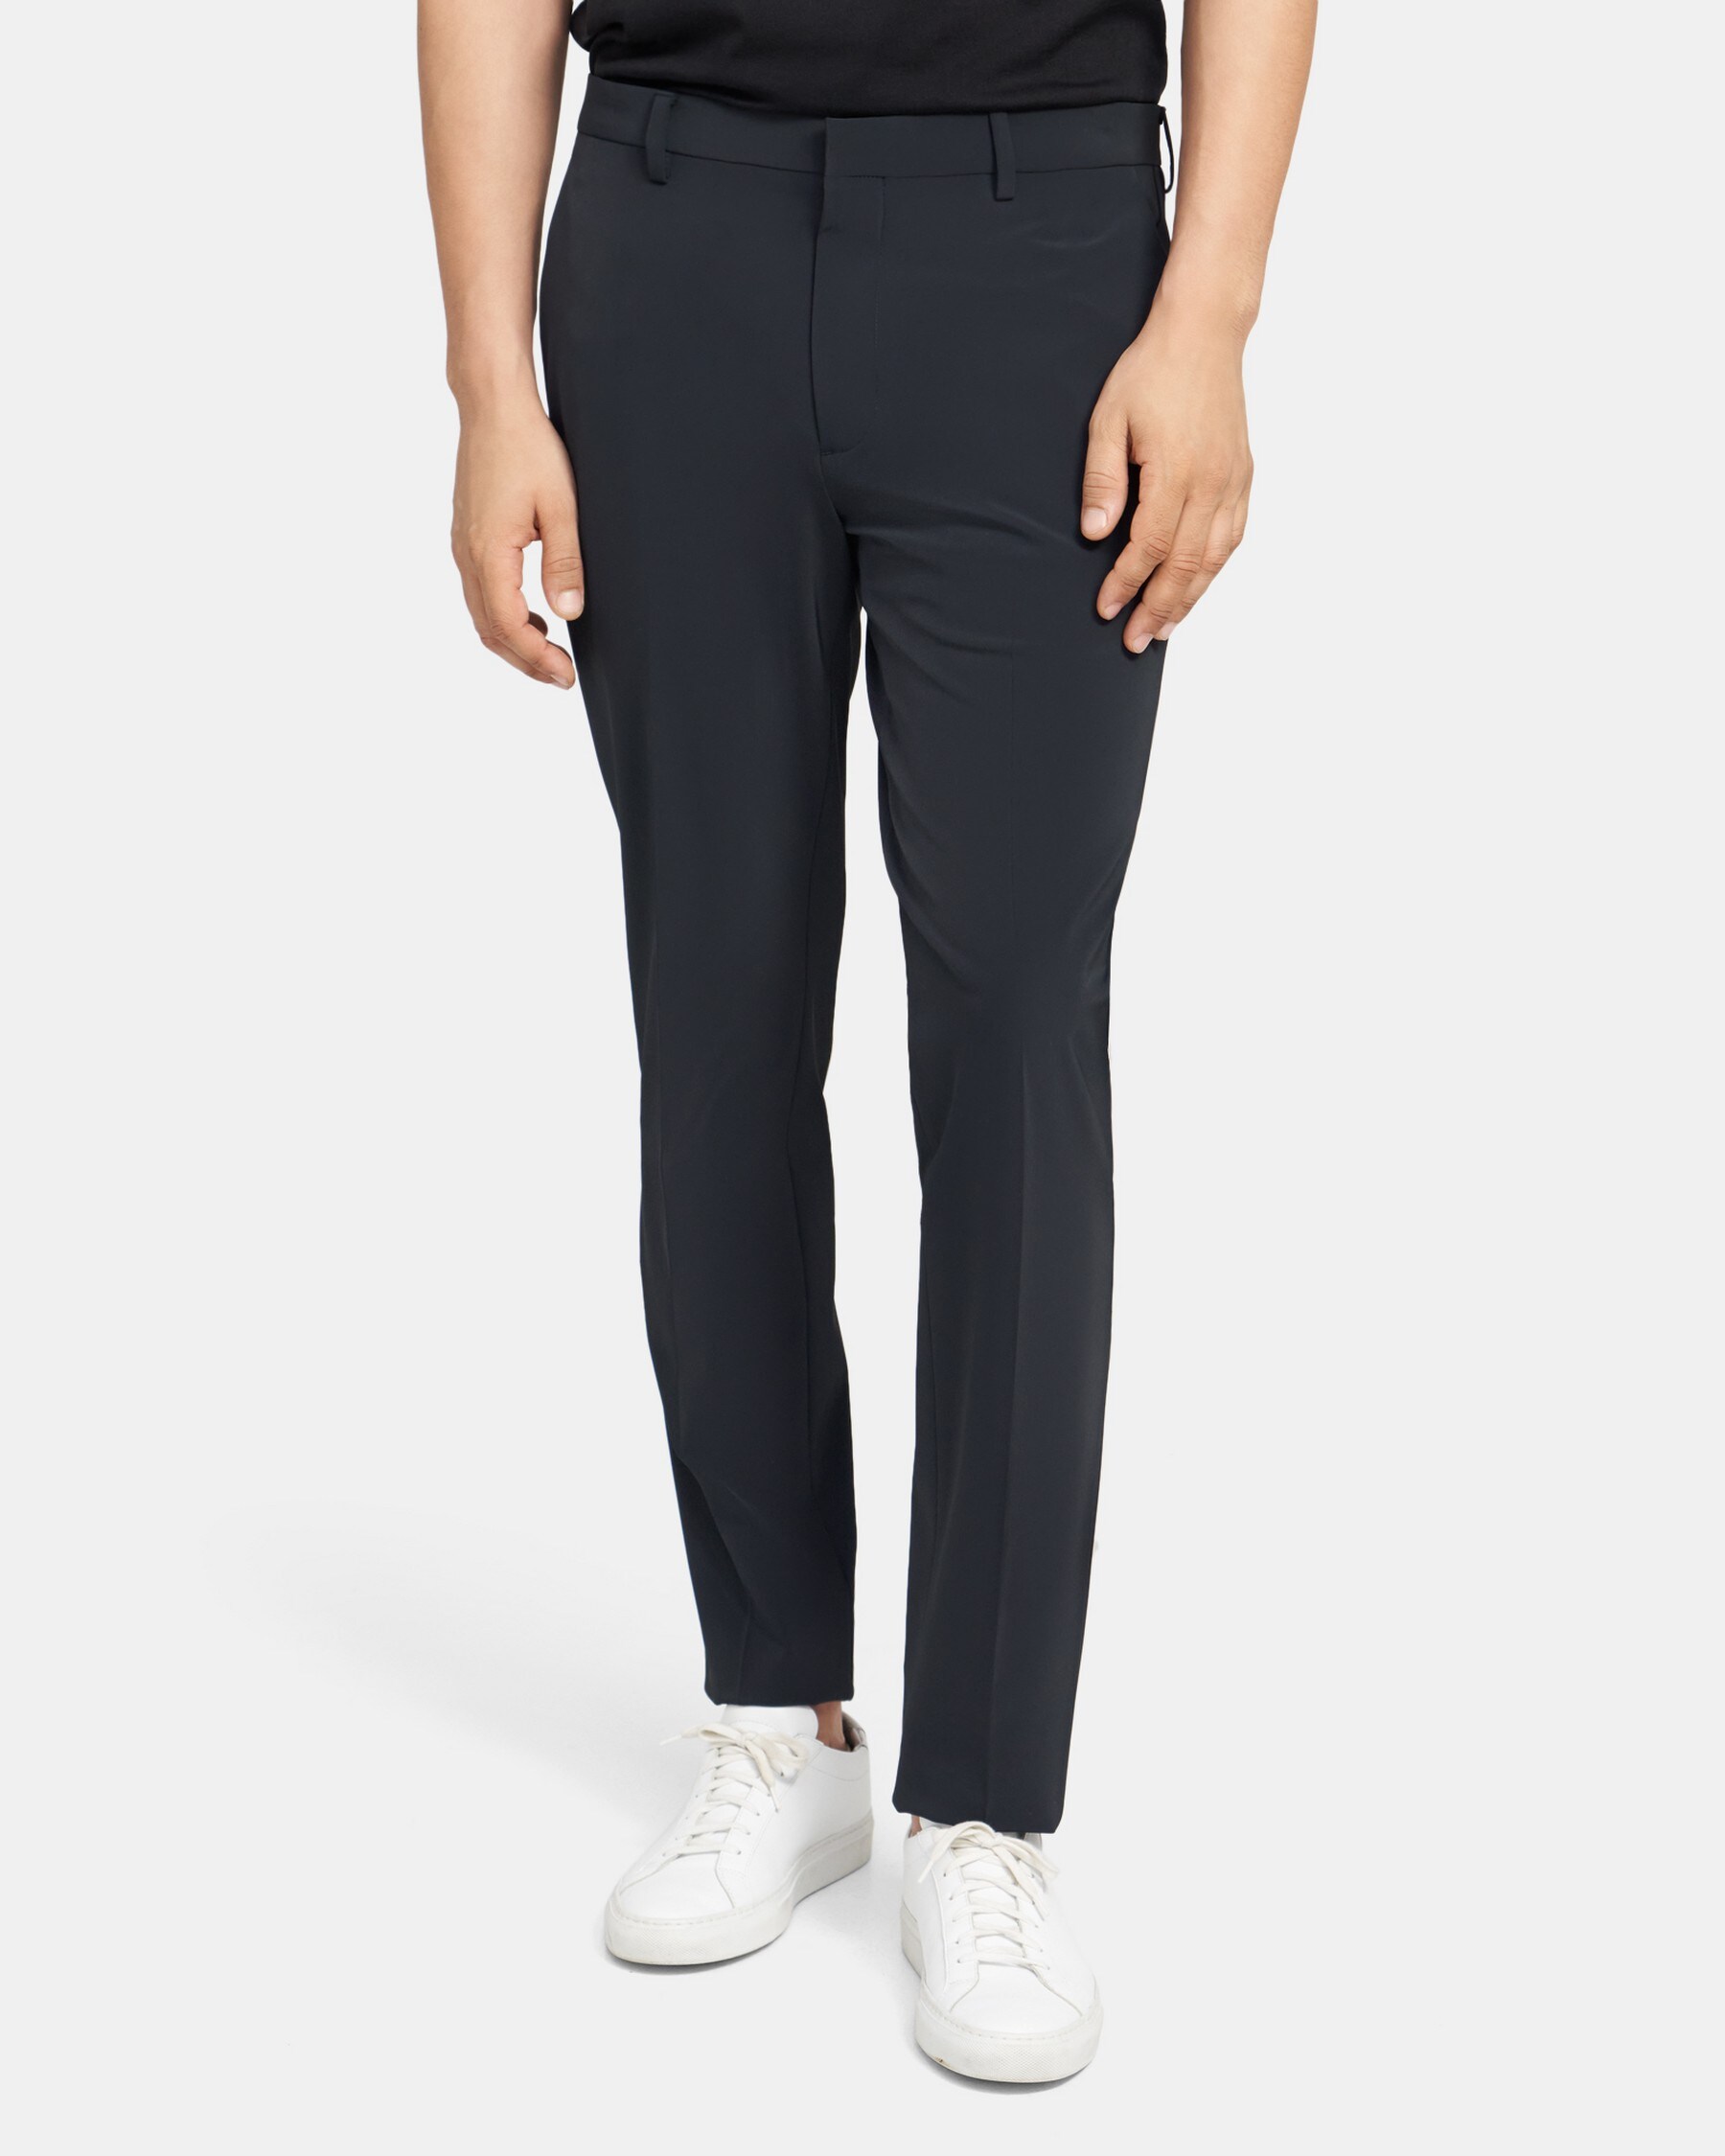 Classic-Fit Pant in Saronni Tech